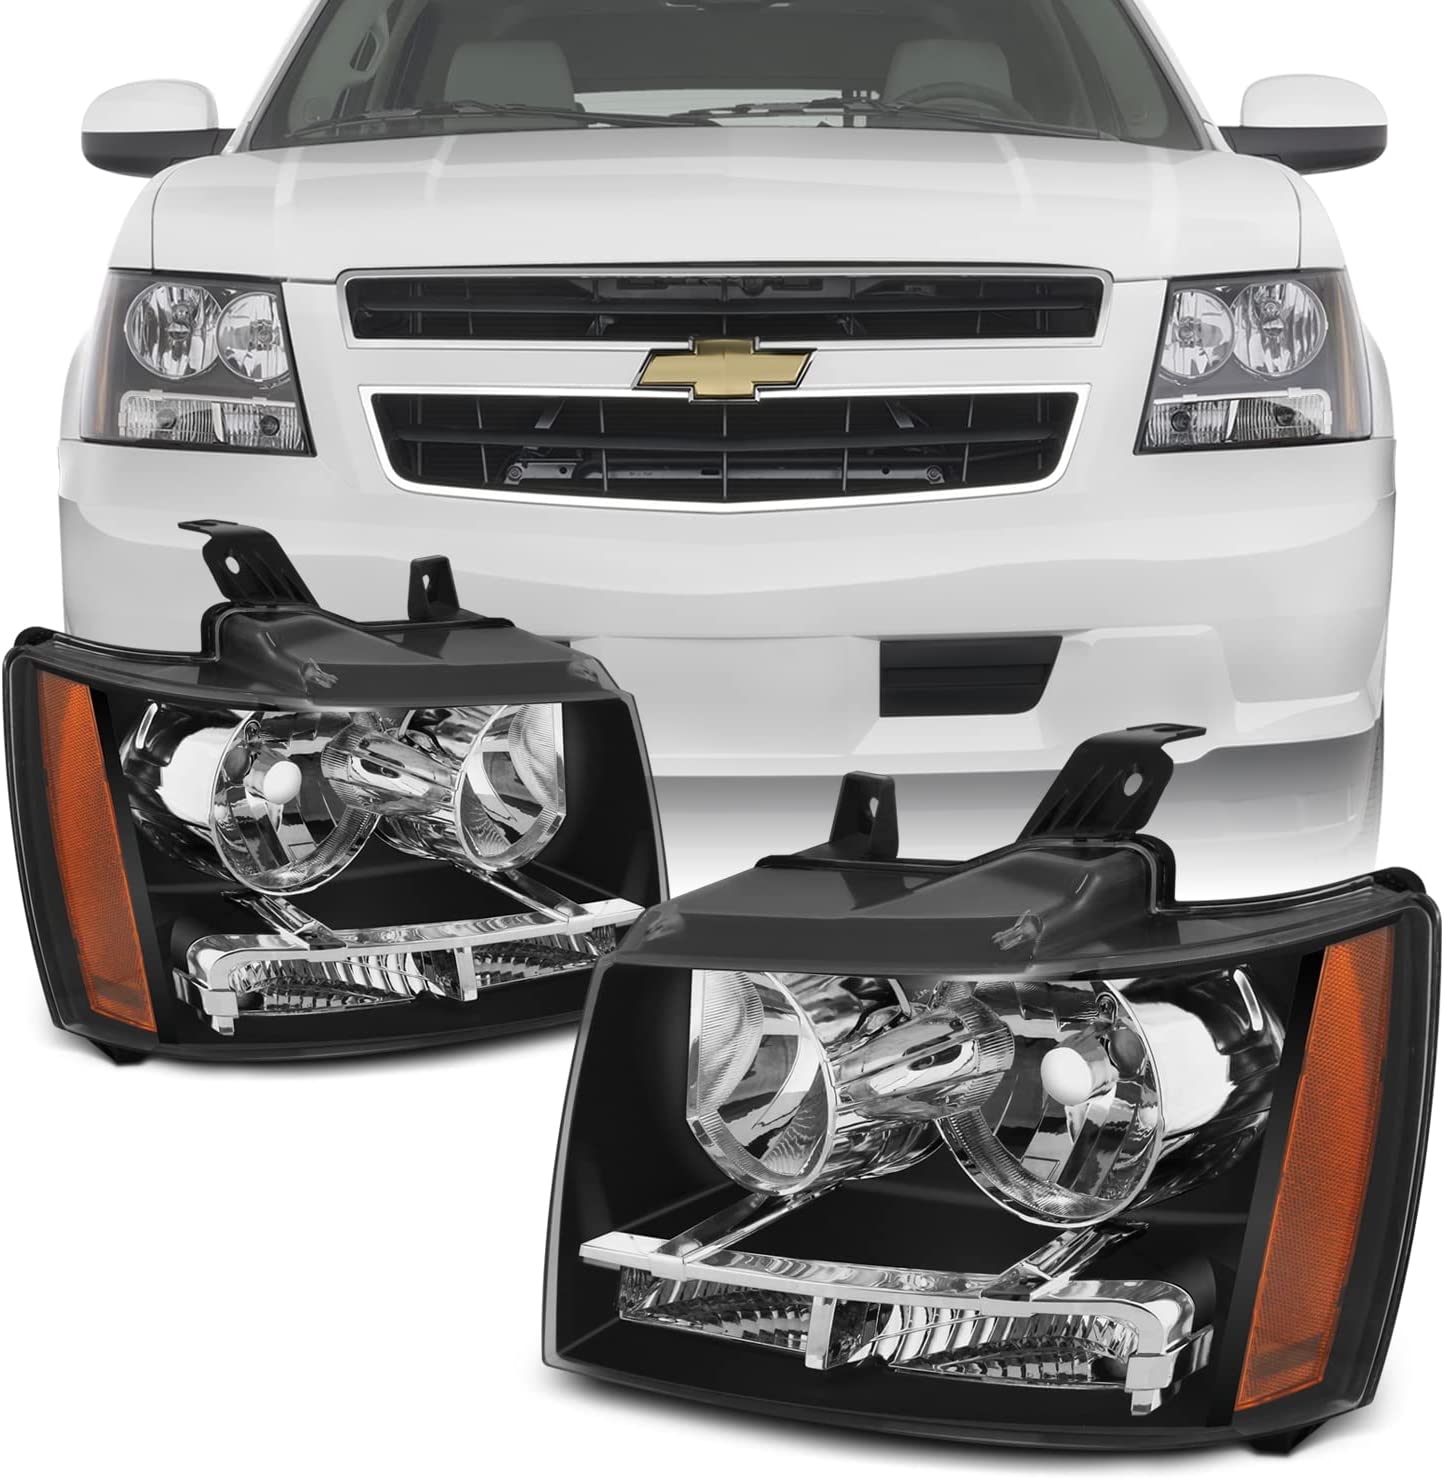 AKKON - For 07-13 Suburban Tahoe Avalanche Chrome Clear Headlights, Direct Replacement Left + Right